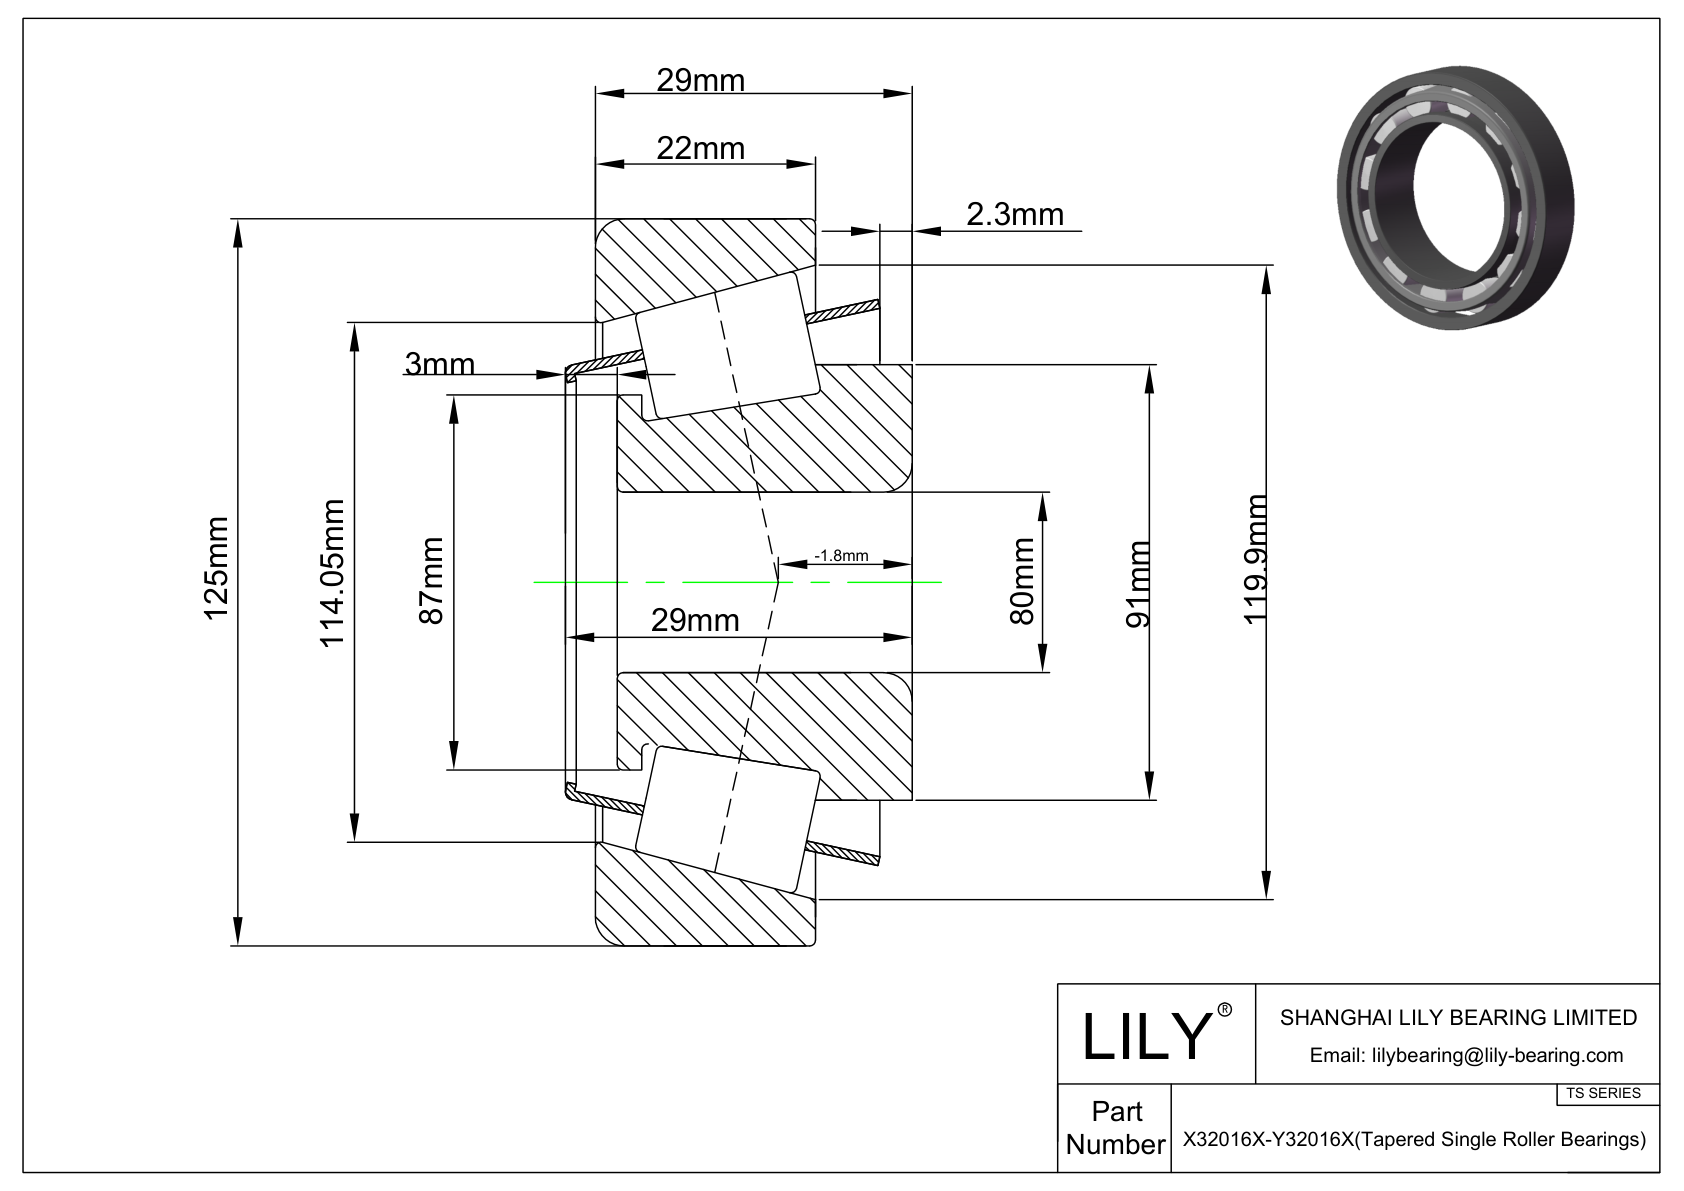 X32016X-Y32016X TS (Tapered Single Roller Bearings) (Metric) cad drawing